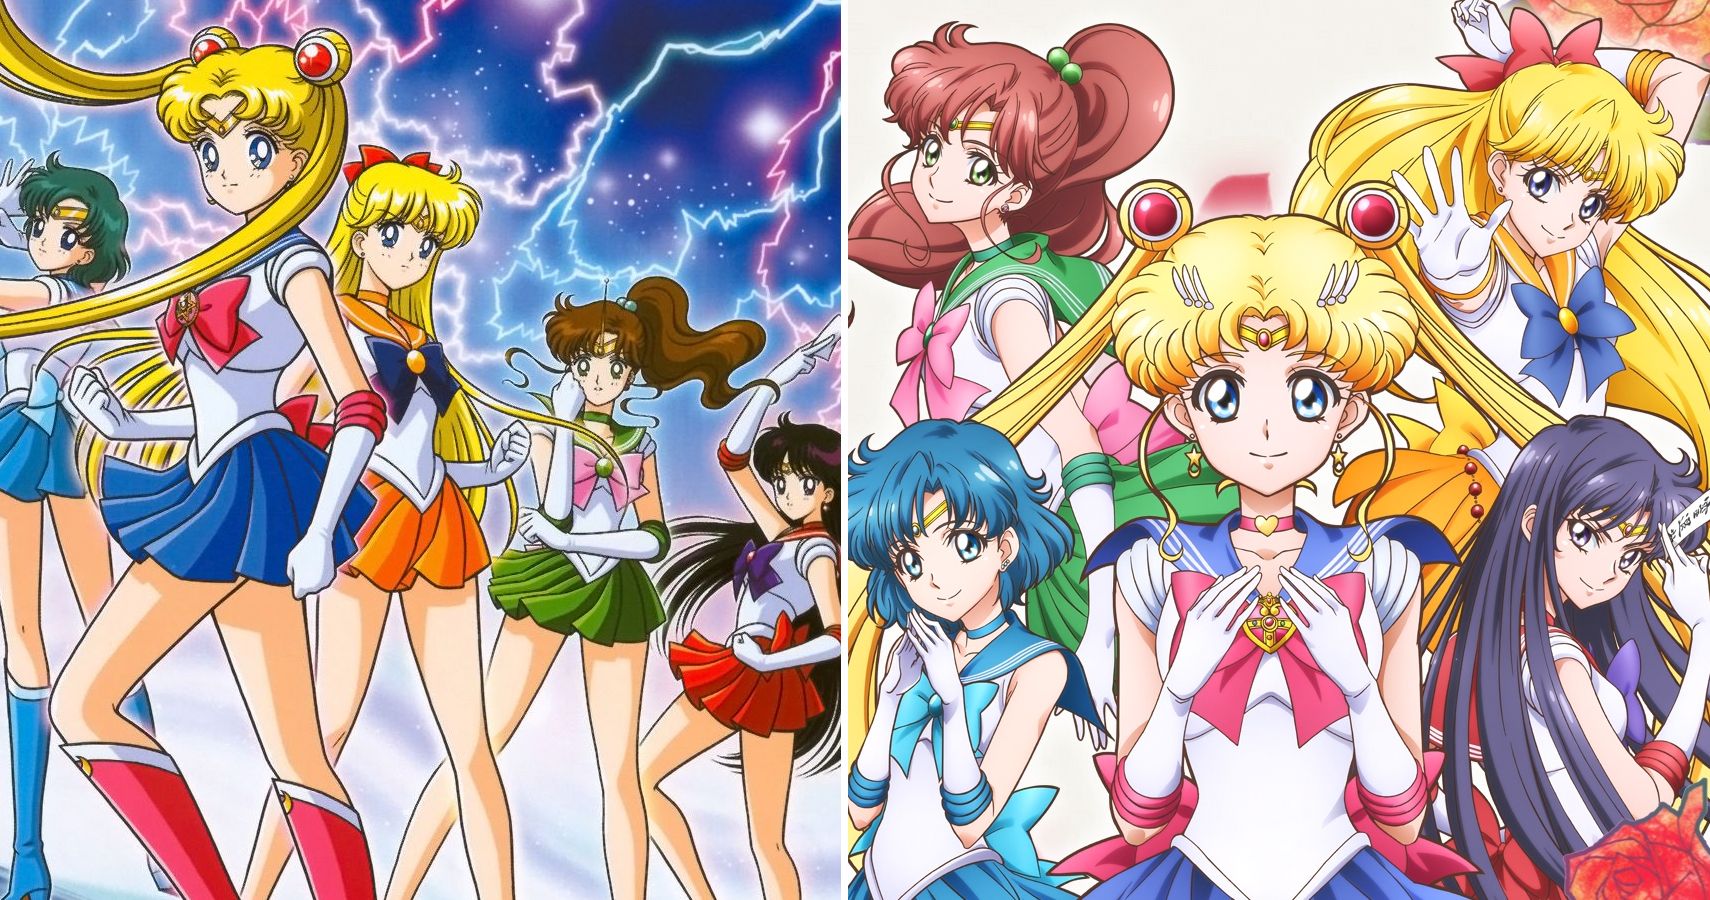 Sailor Moon Crystal has ended with the release of Sailor Moon